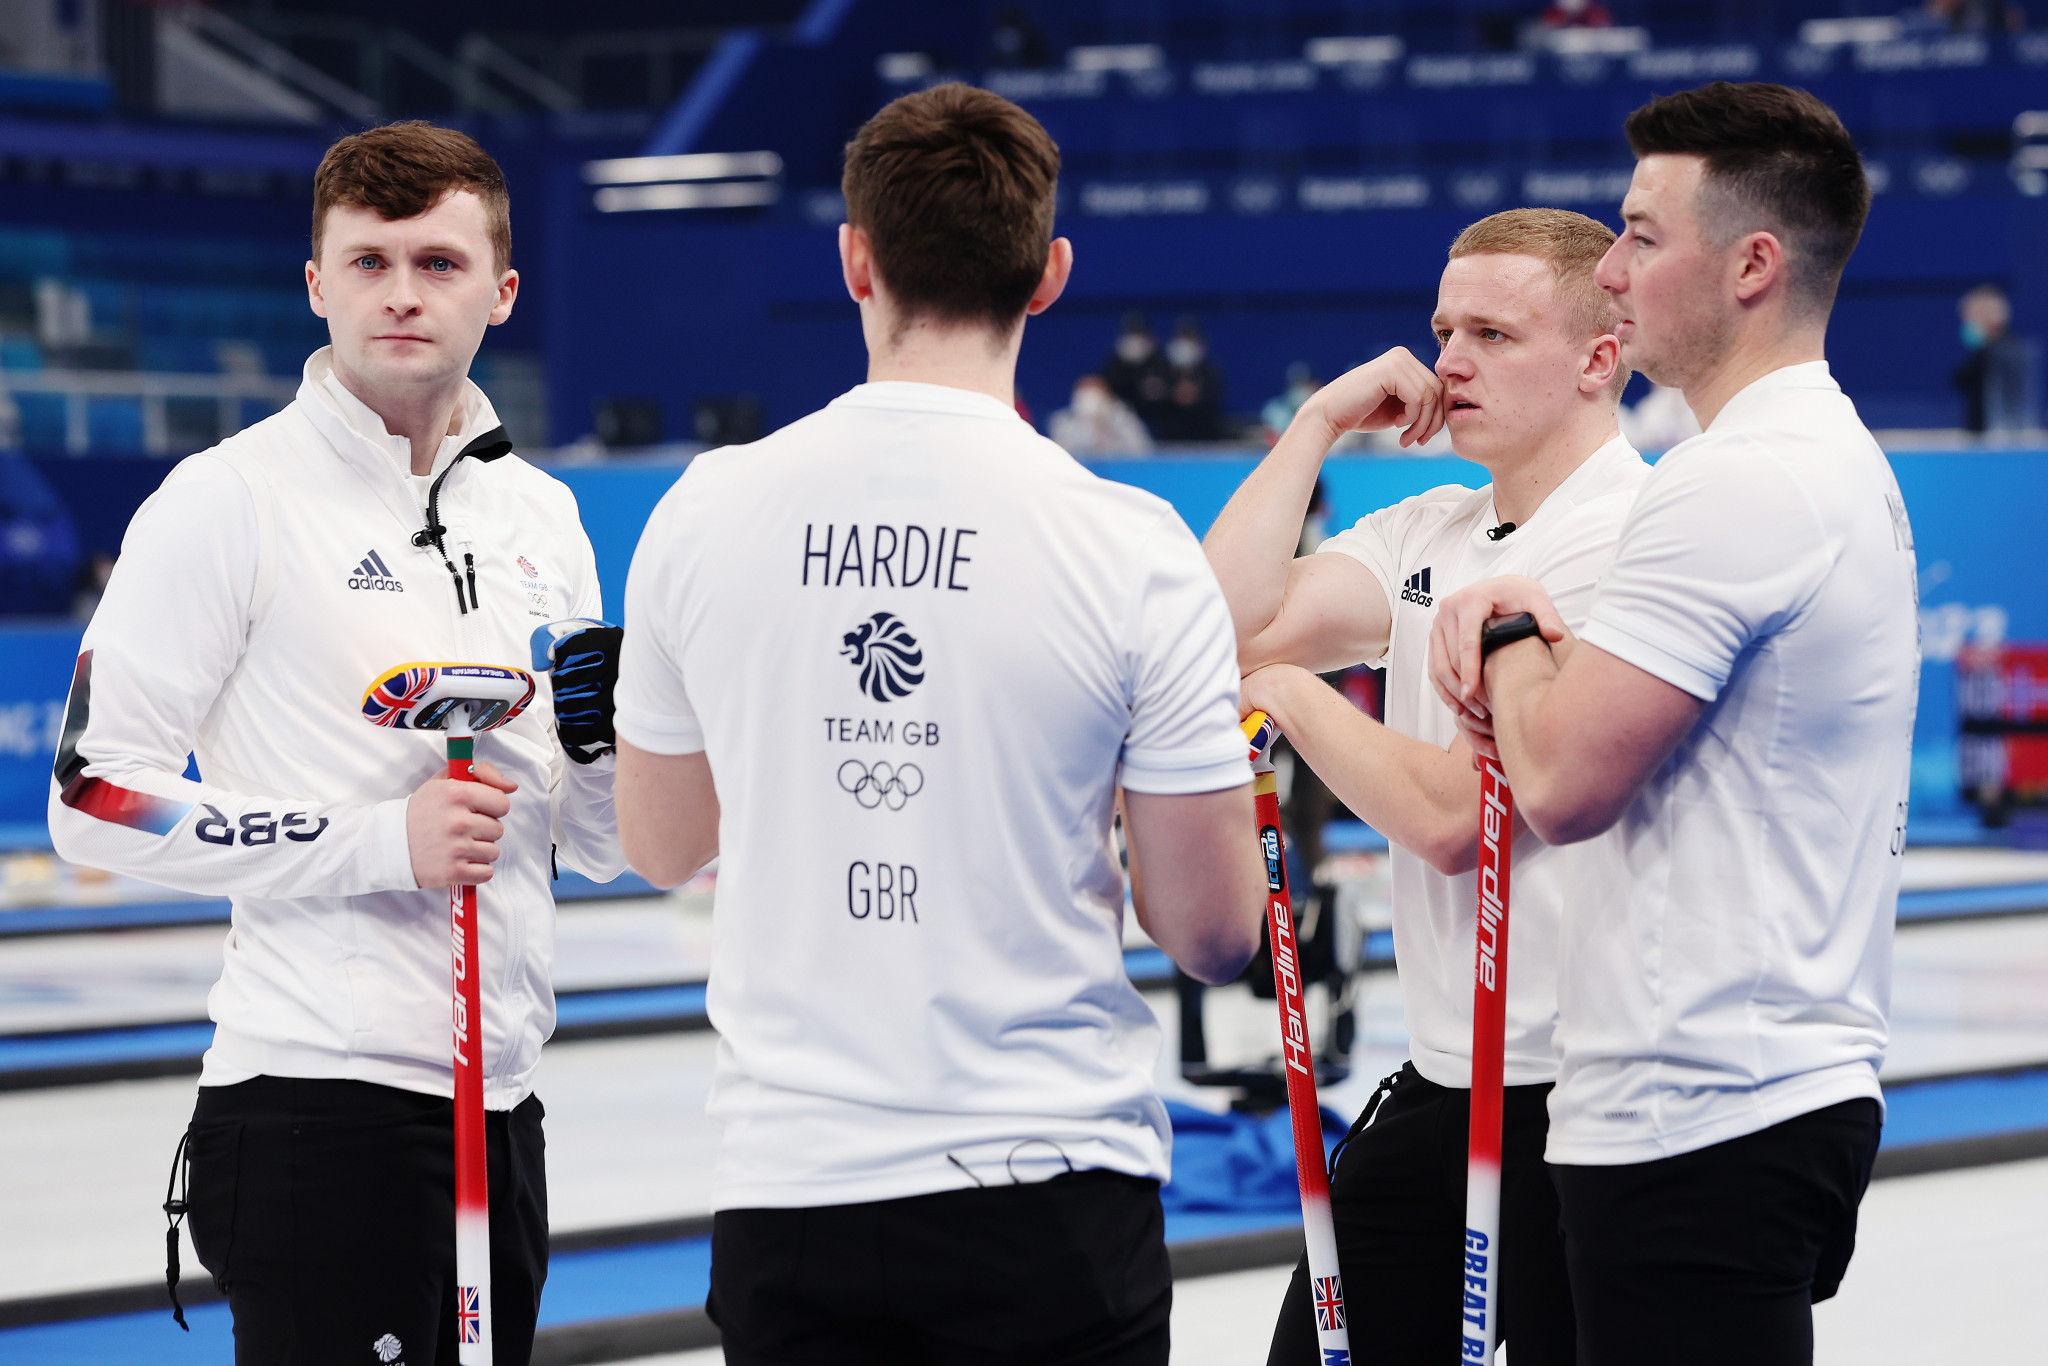 Britain's men's curling squad are aiming for a first Olympic gold medal since 1924 at Milan Cortina 2026 ©Getty Images